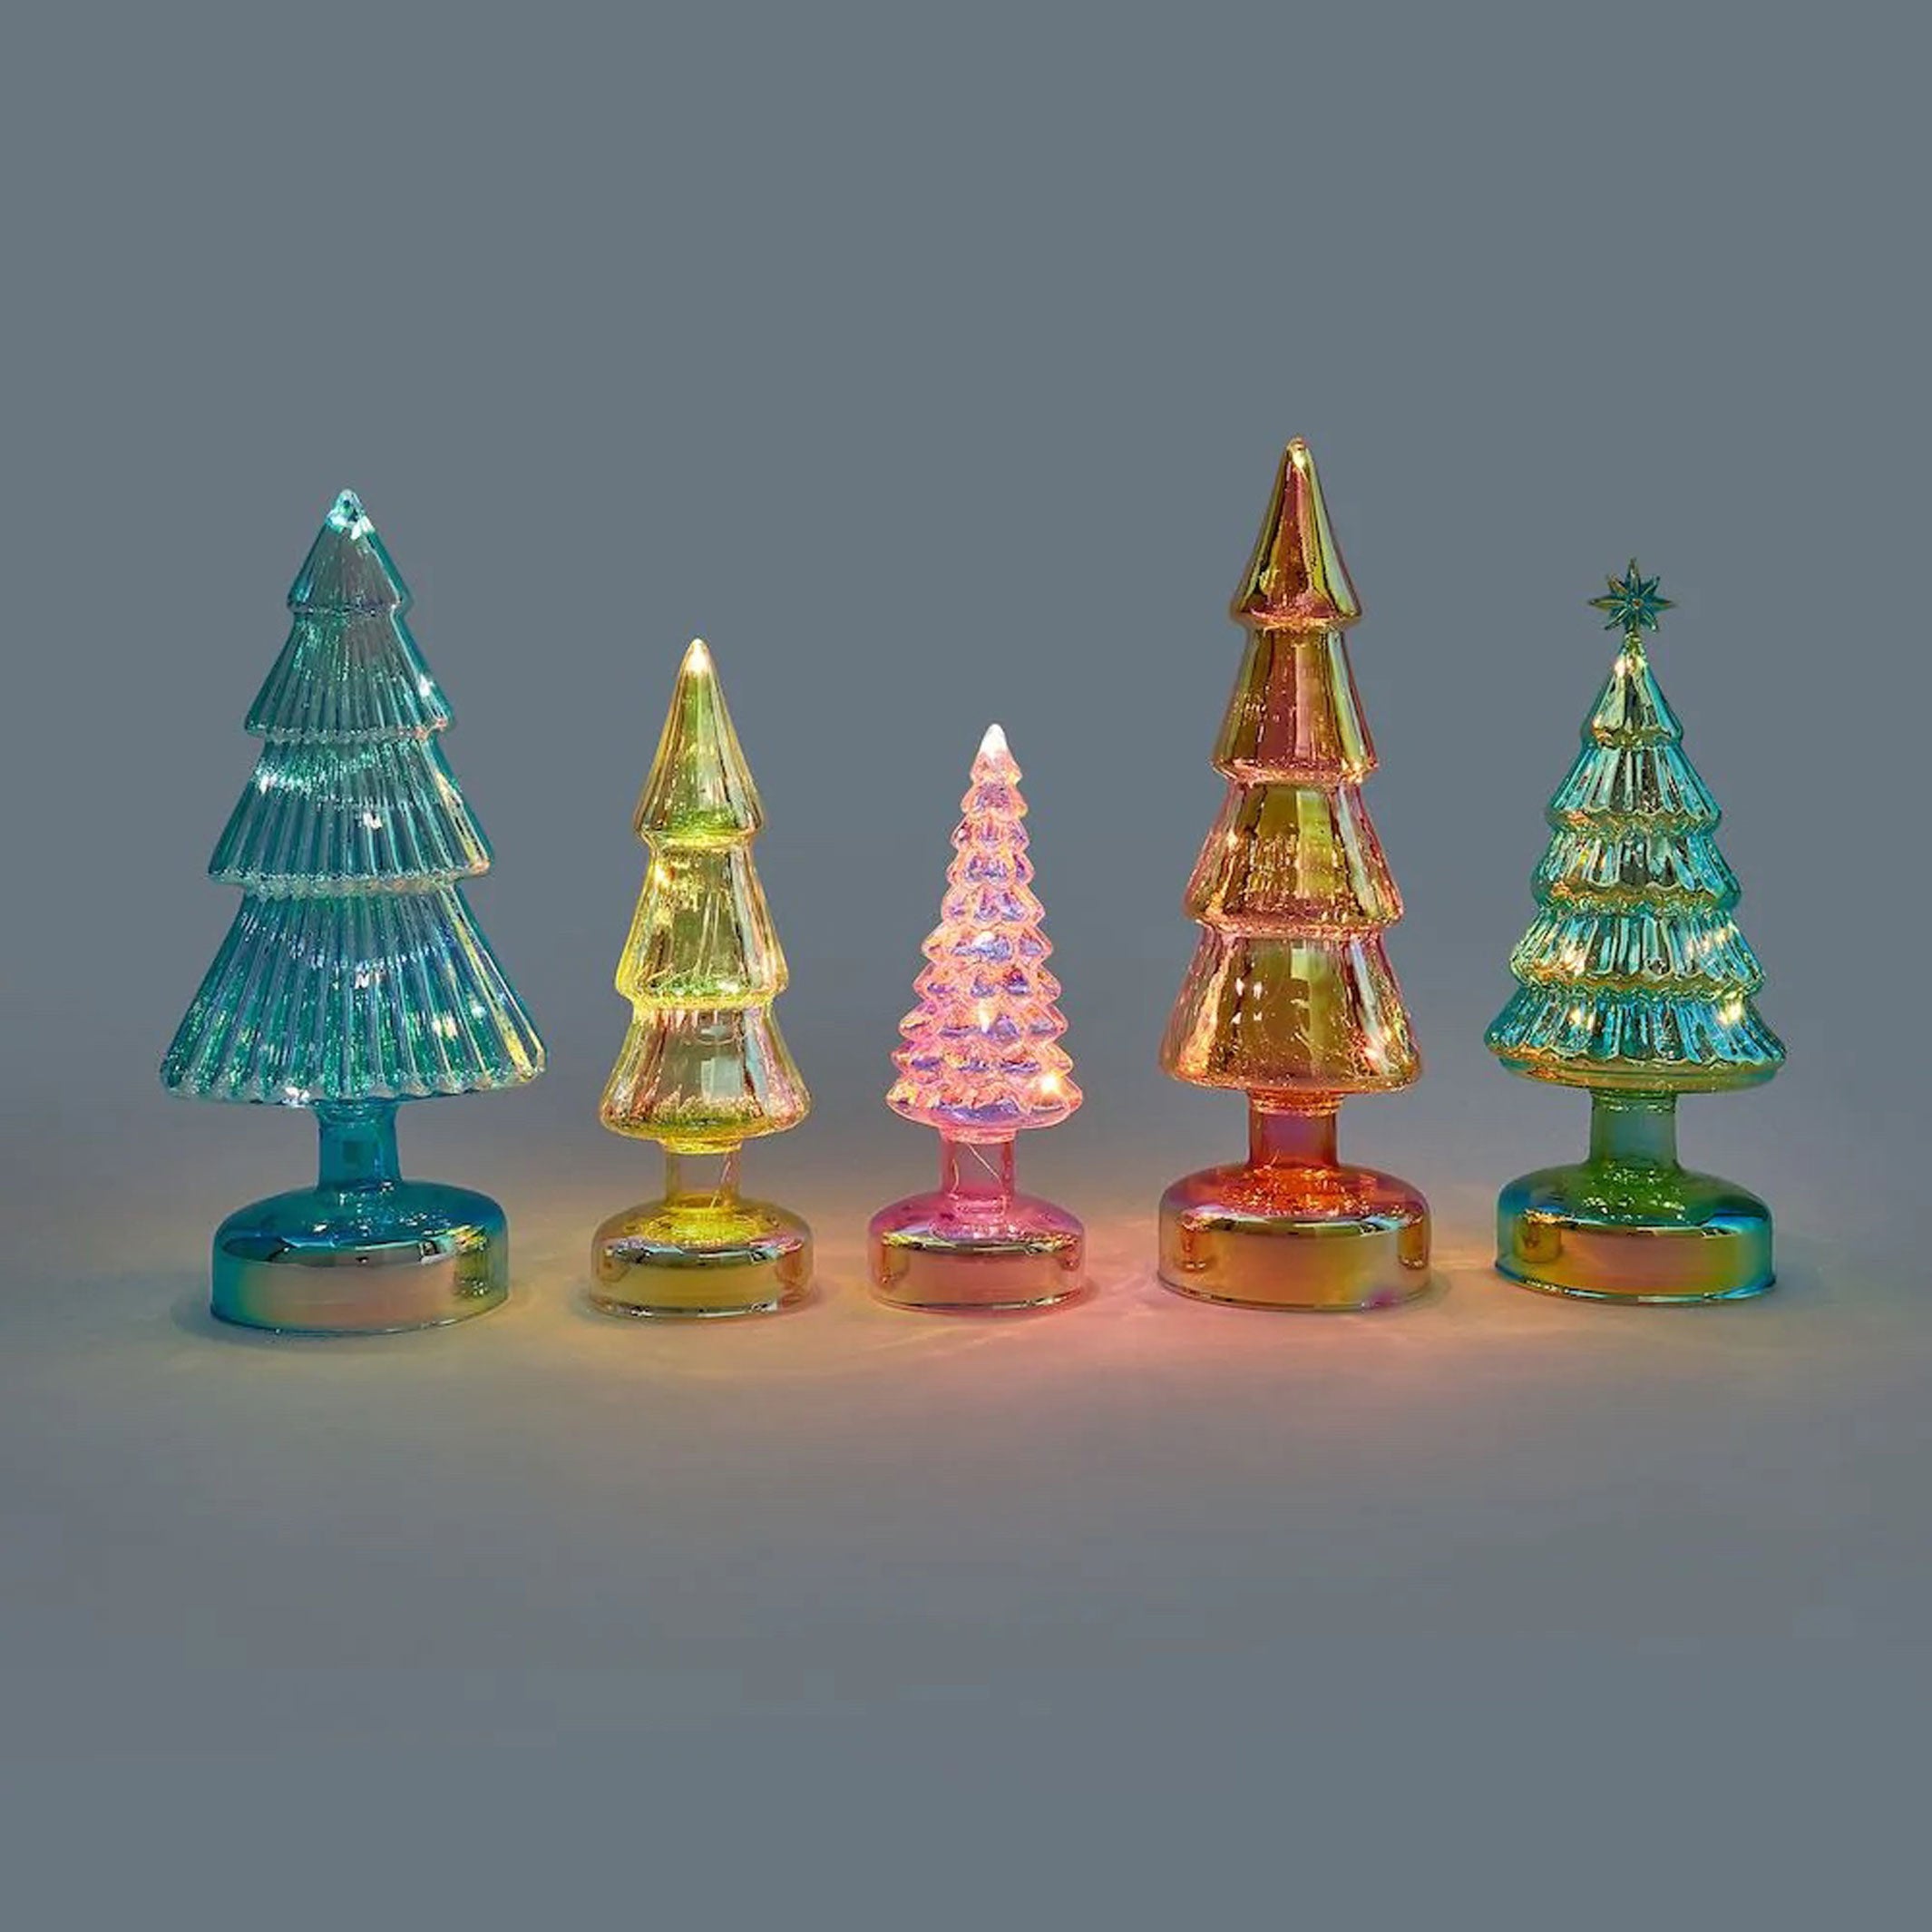 Small Colorful LED GLASS LIGHTED TREES | LED lighted glass TREES | Set of 5 | MoMA